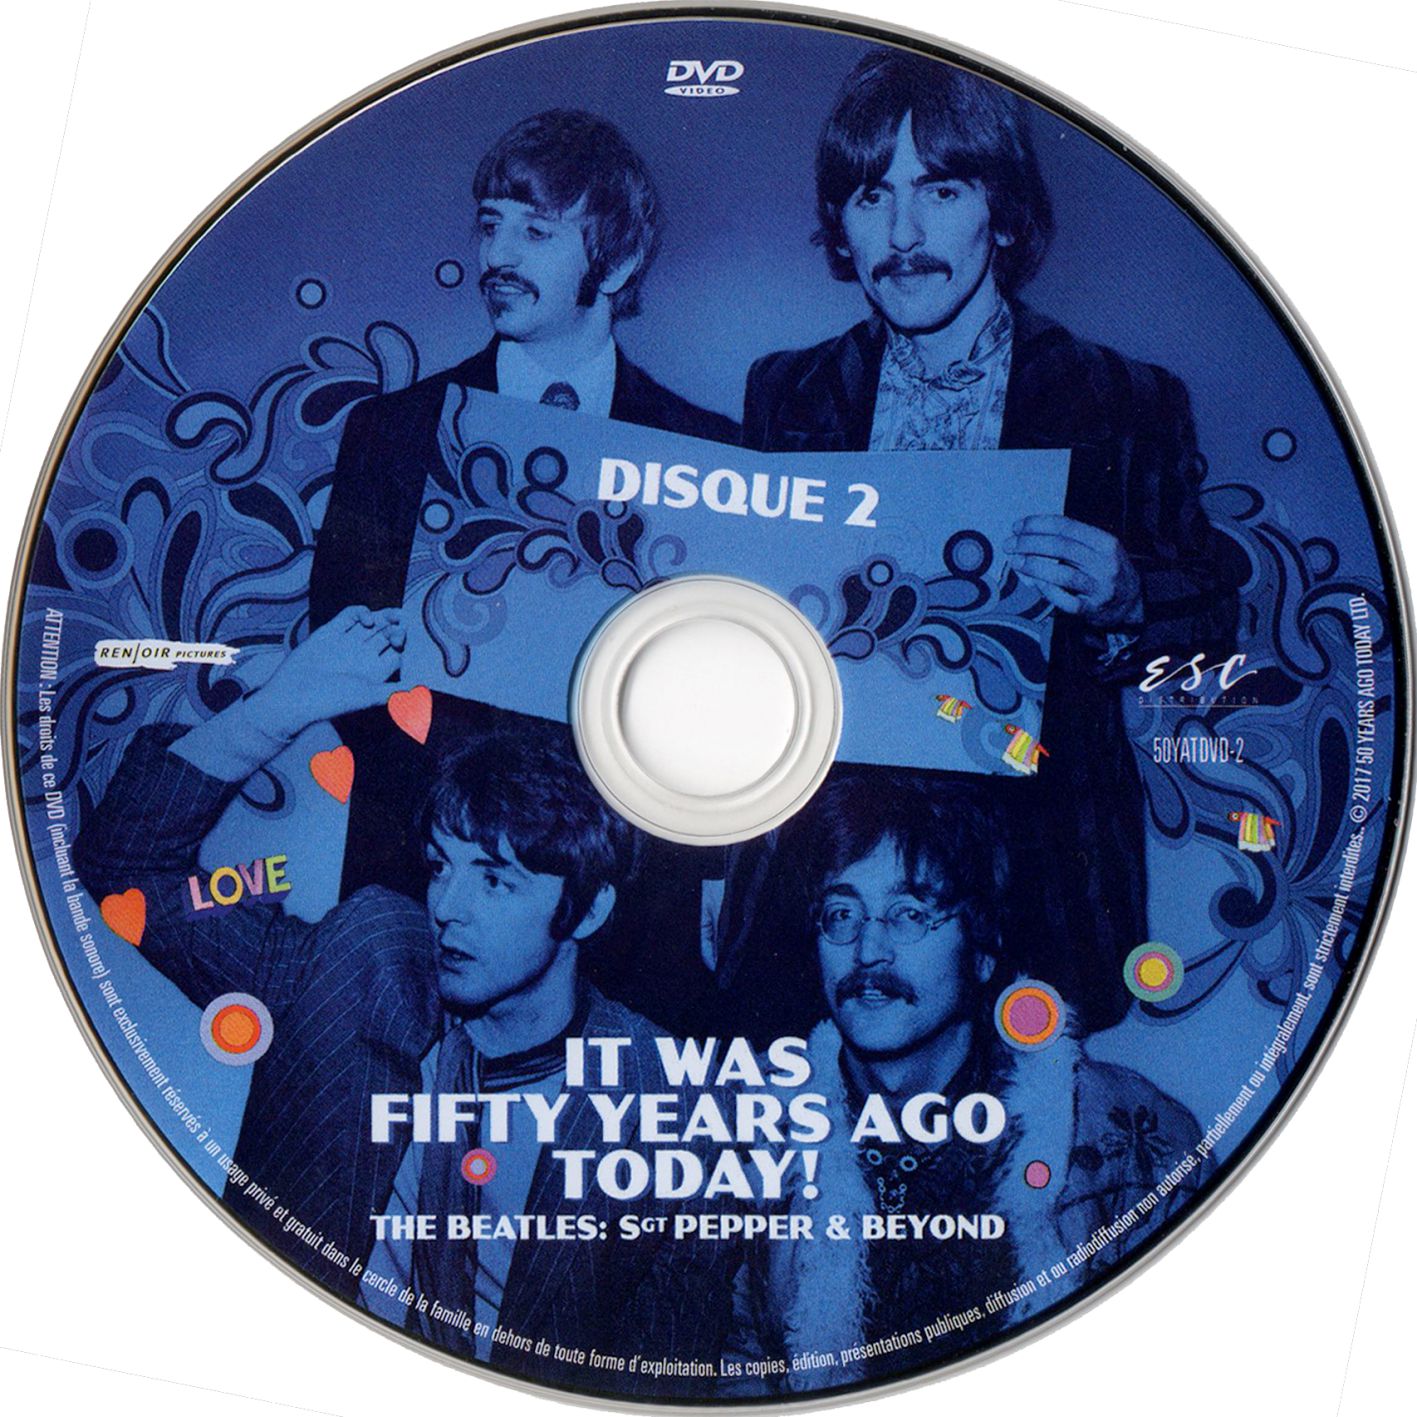 It was fifty years ago today Disc 2